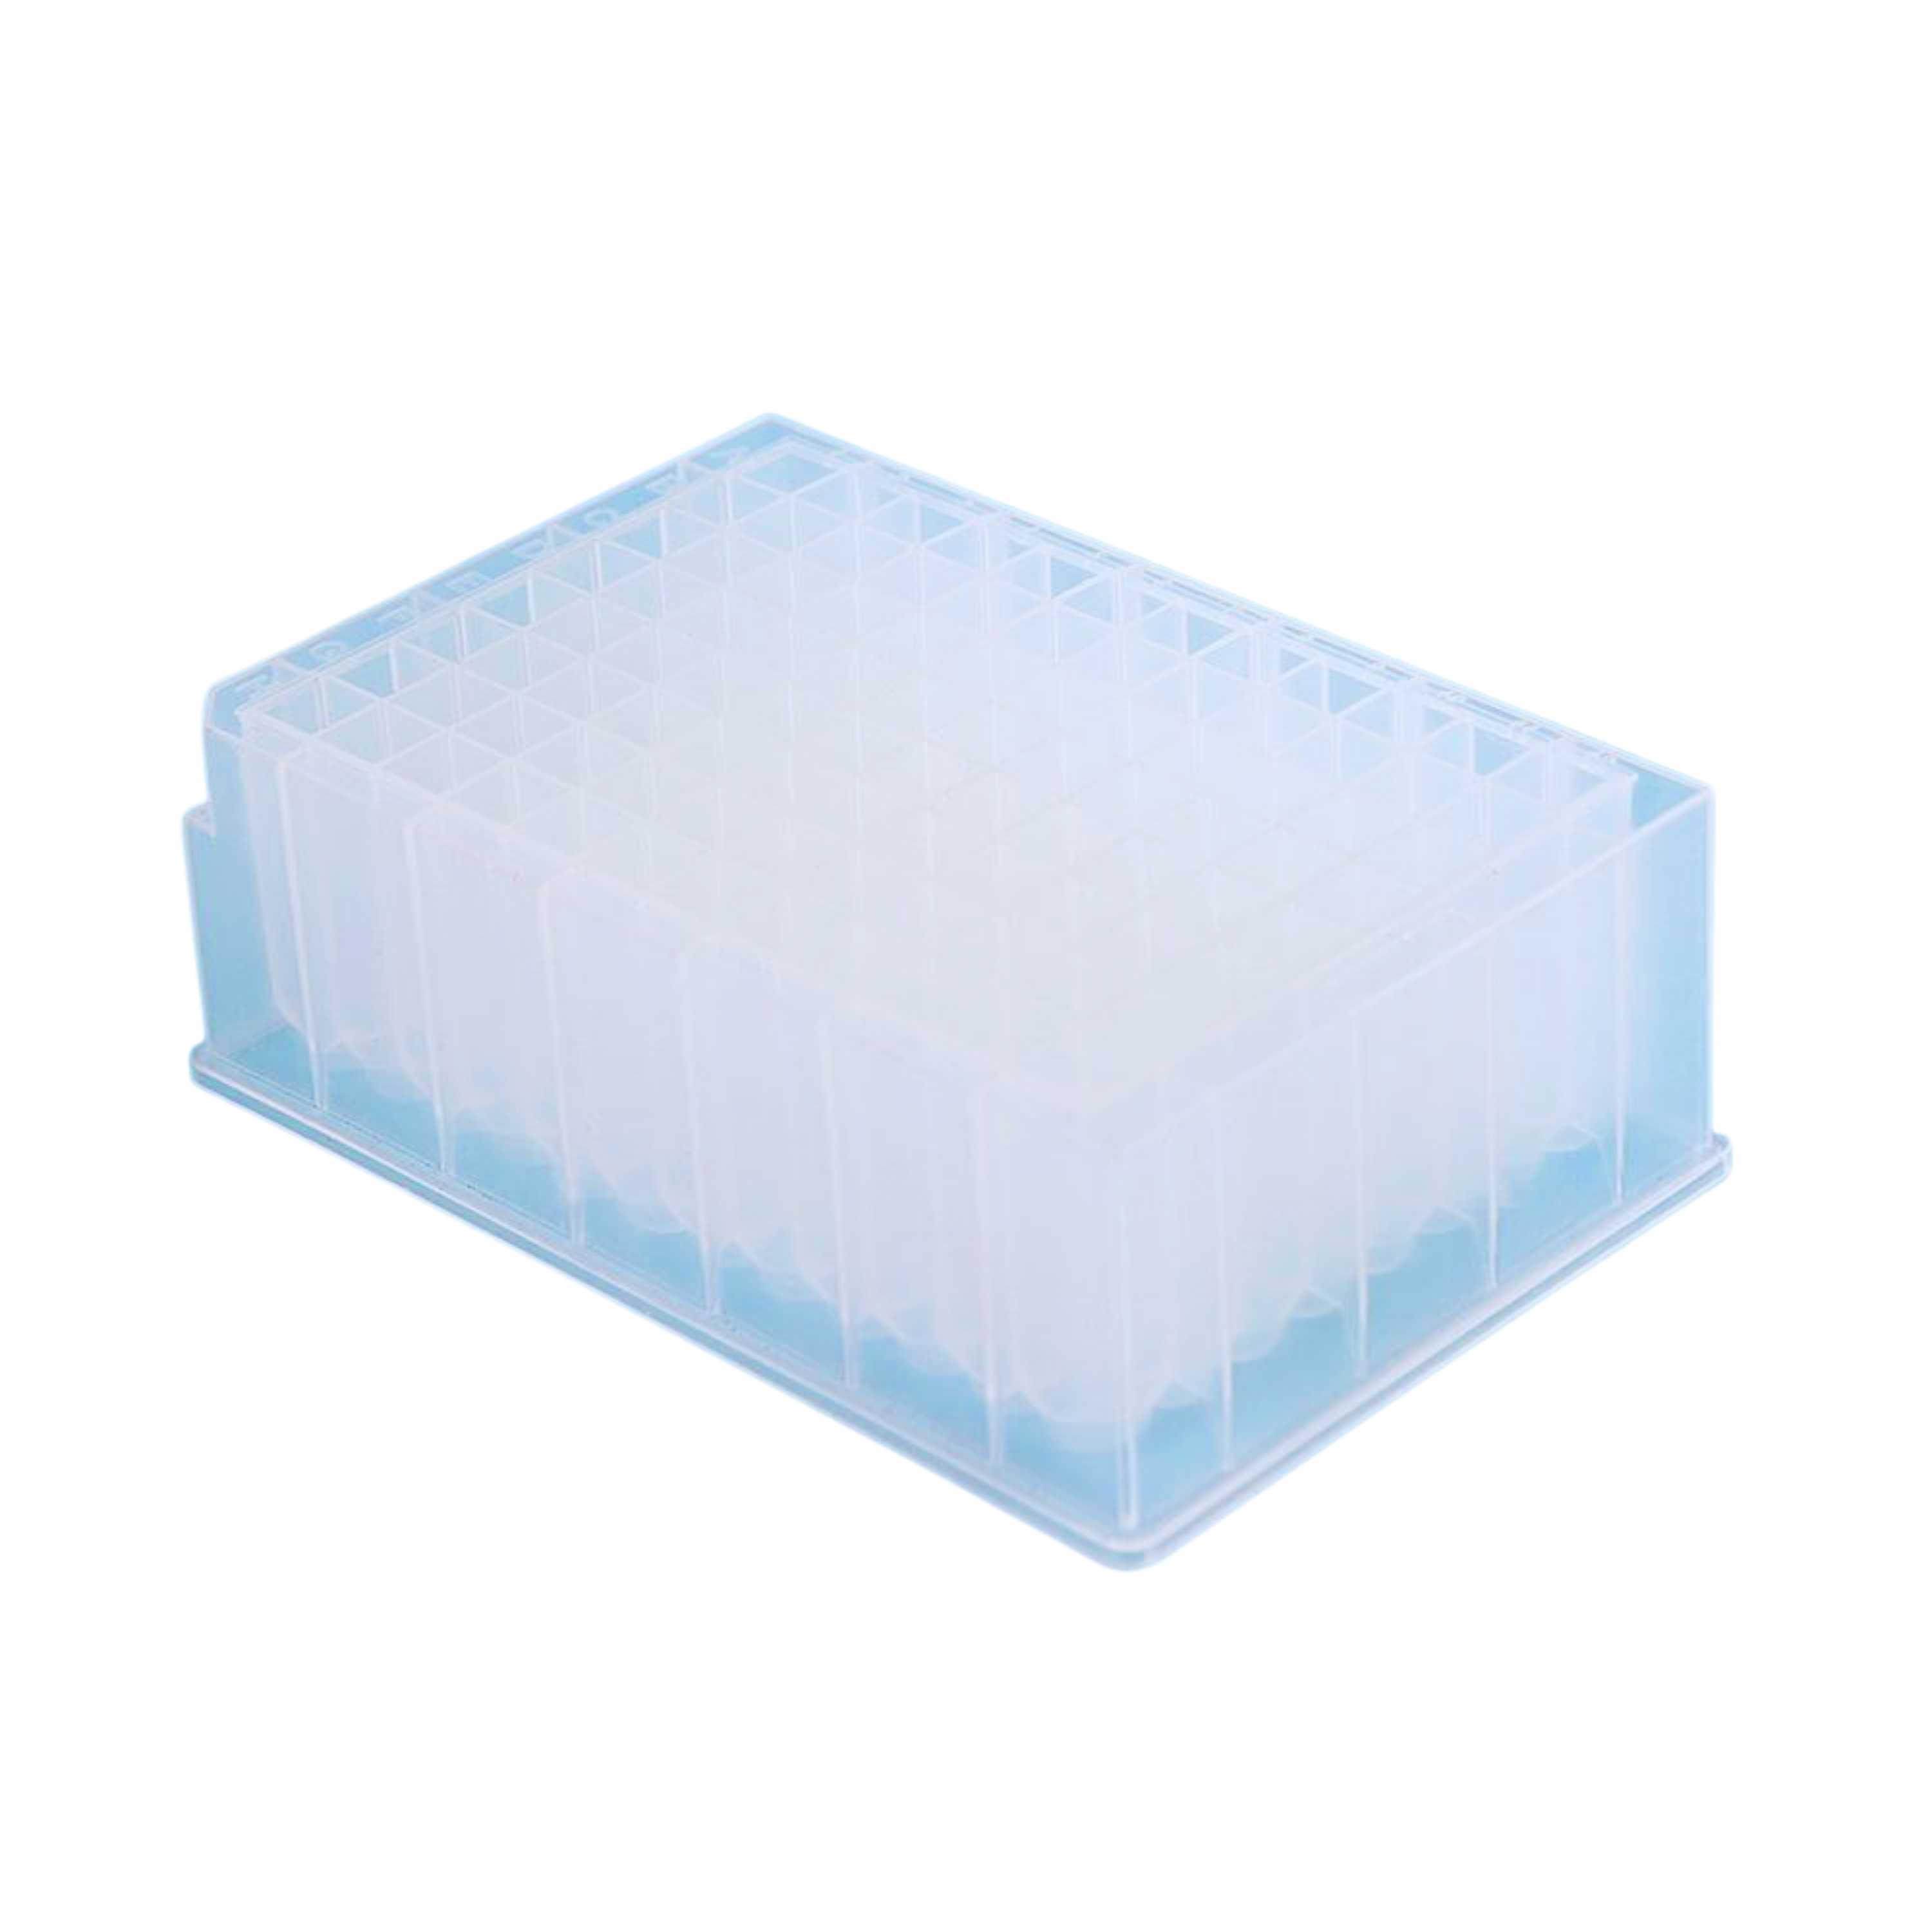 https://cdn11.bigcommerce.com/s-5zeg7269wd/images/stencil/original/products/412/1189/22ml-96-Well-Deep-Well-Plate-U-Bottom-Round-Well-Individual-Pack-Sterile-16-platespack-4-packscase-from-MedFly_1080__14768.1657277618.jpg?c=1